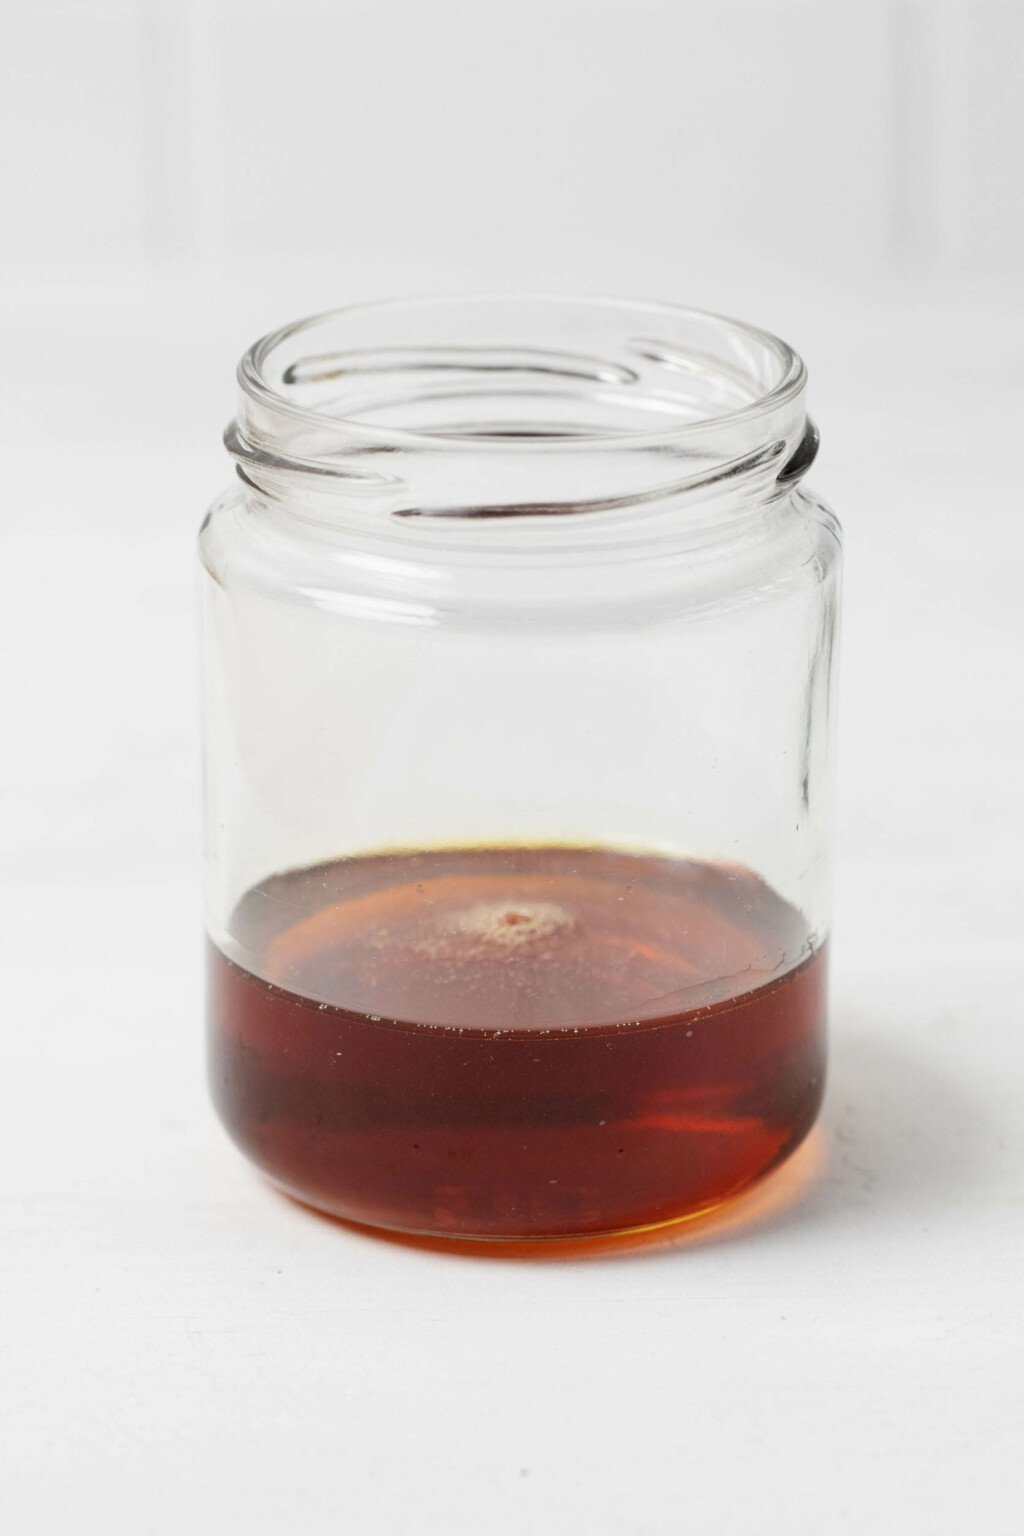 A jar of herb infused agave syrup rests on a white surface.